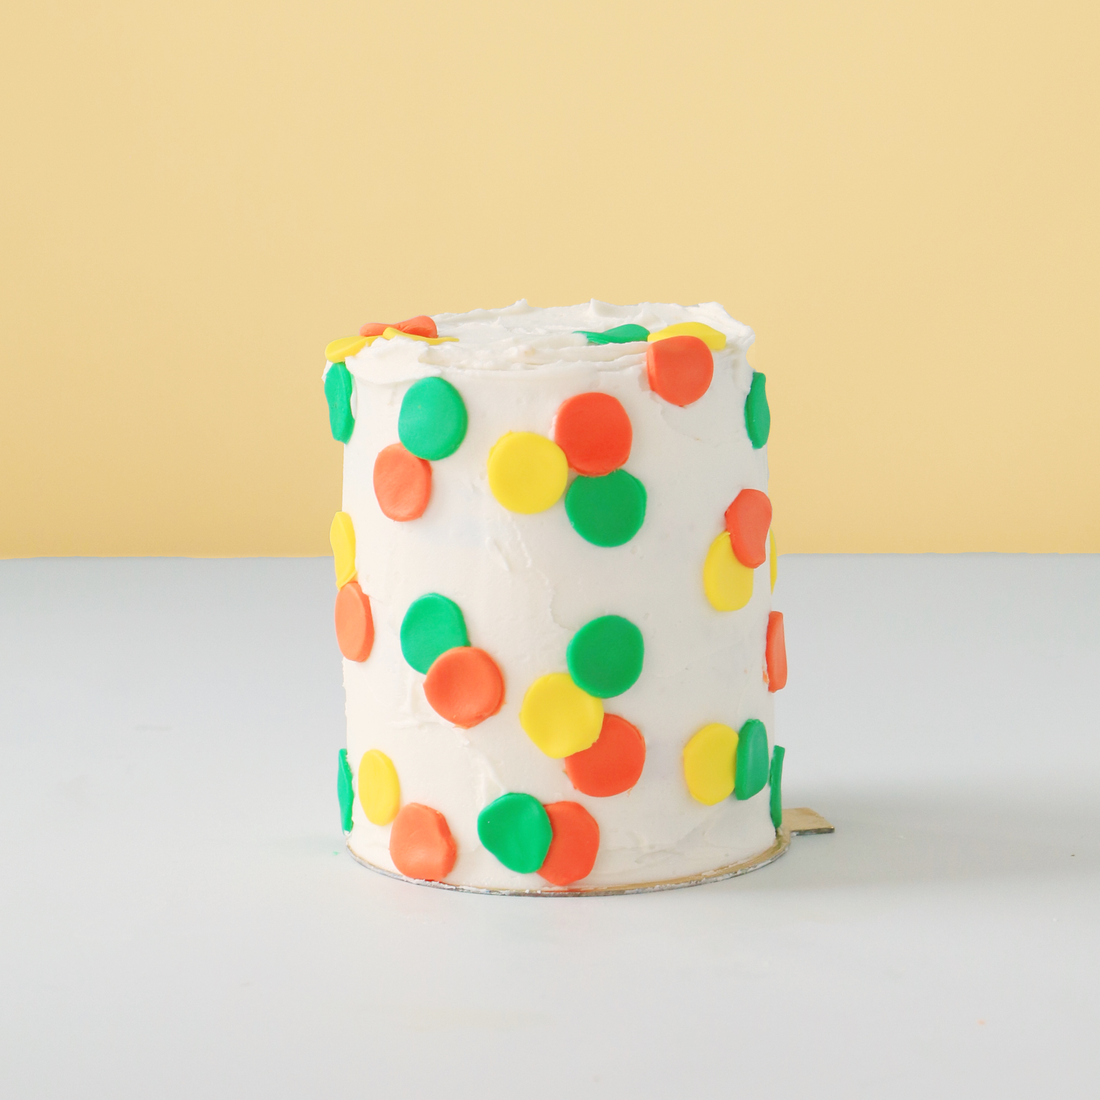 Tall cake with dots